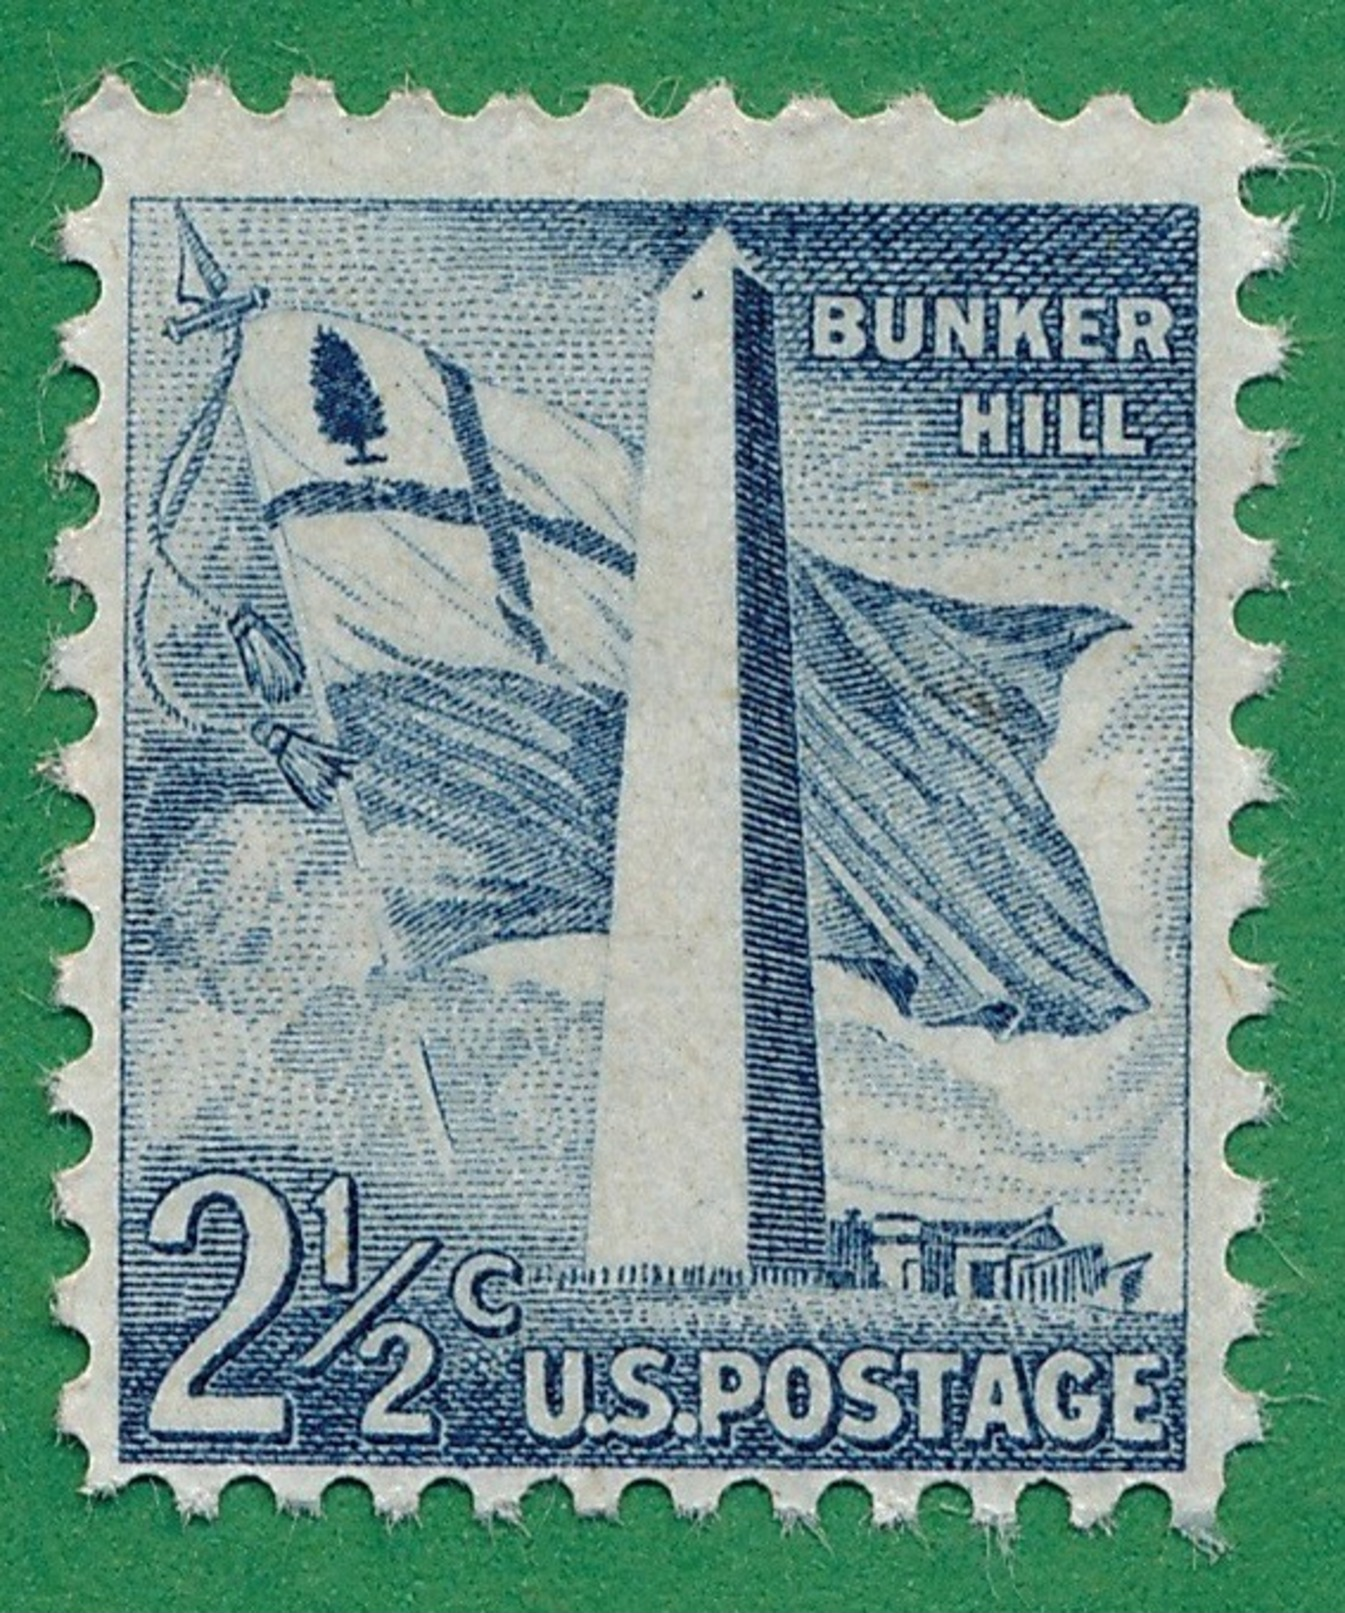 United States - 1954-80 - Bunker Hill - Scott #1034  - MH - Unused Stamps